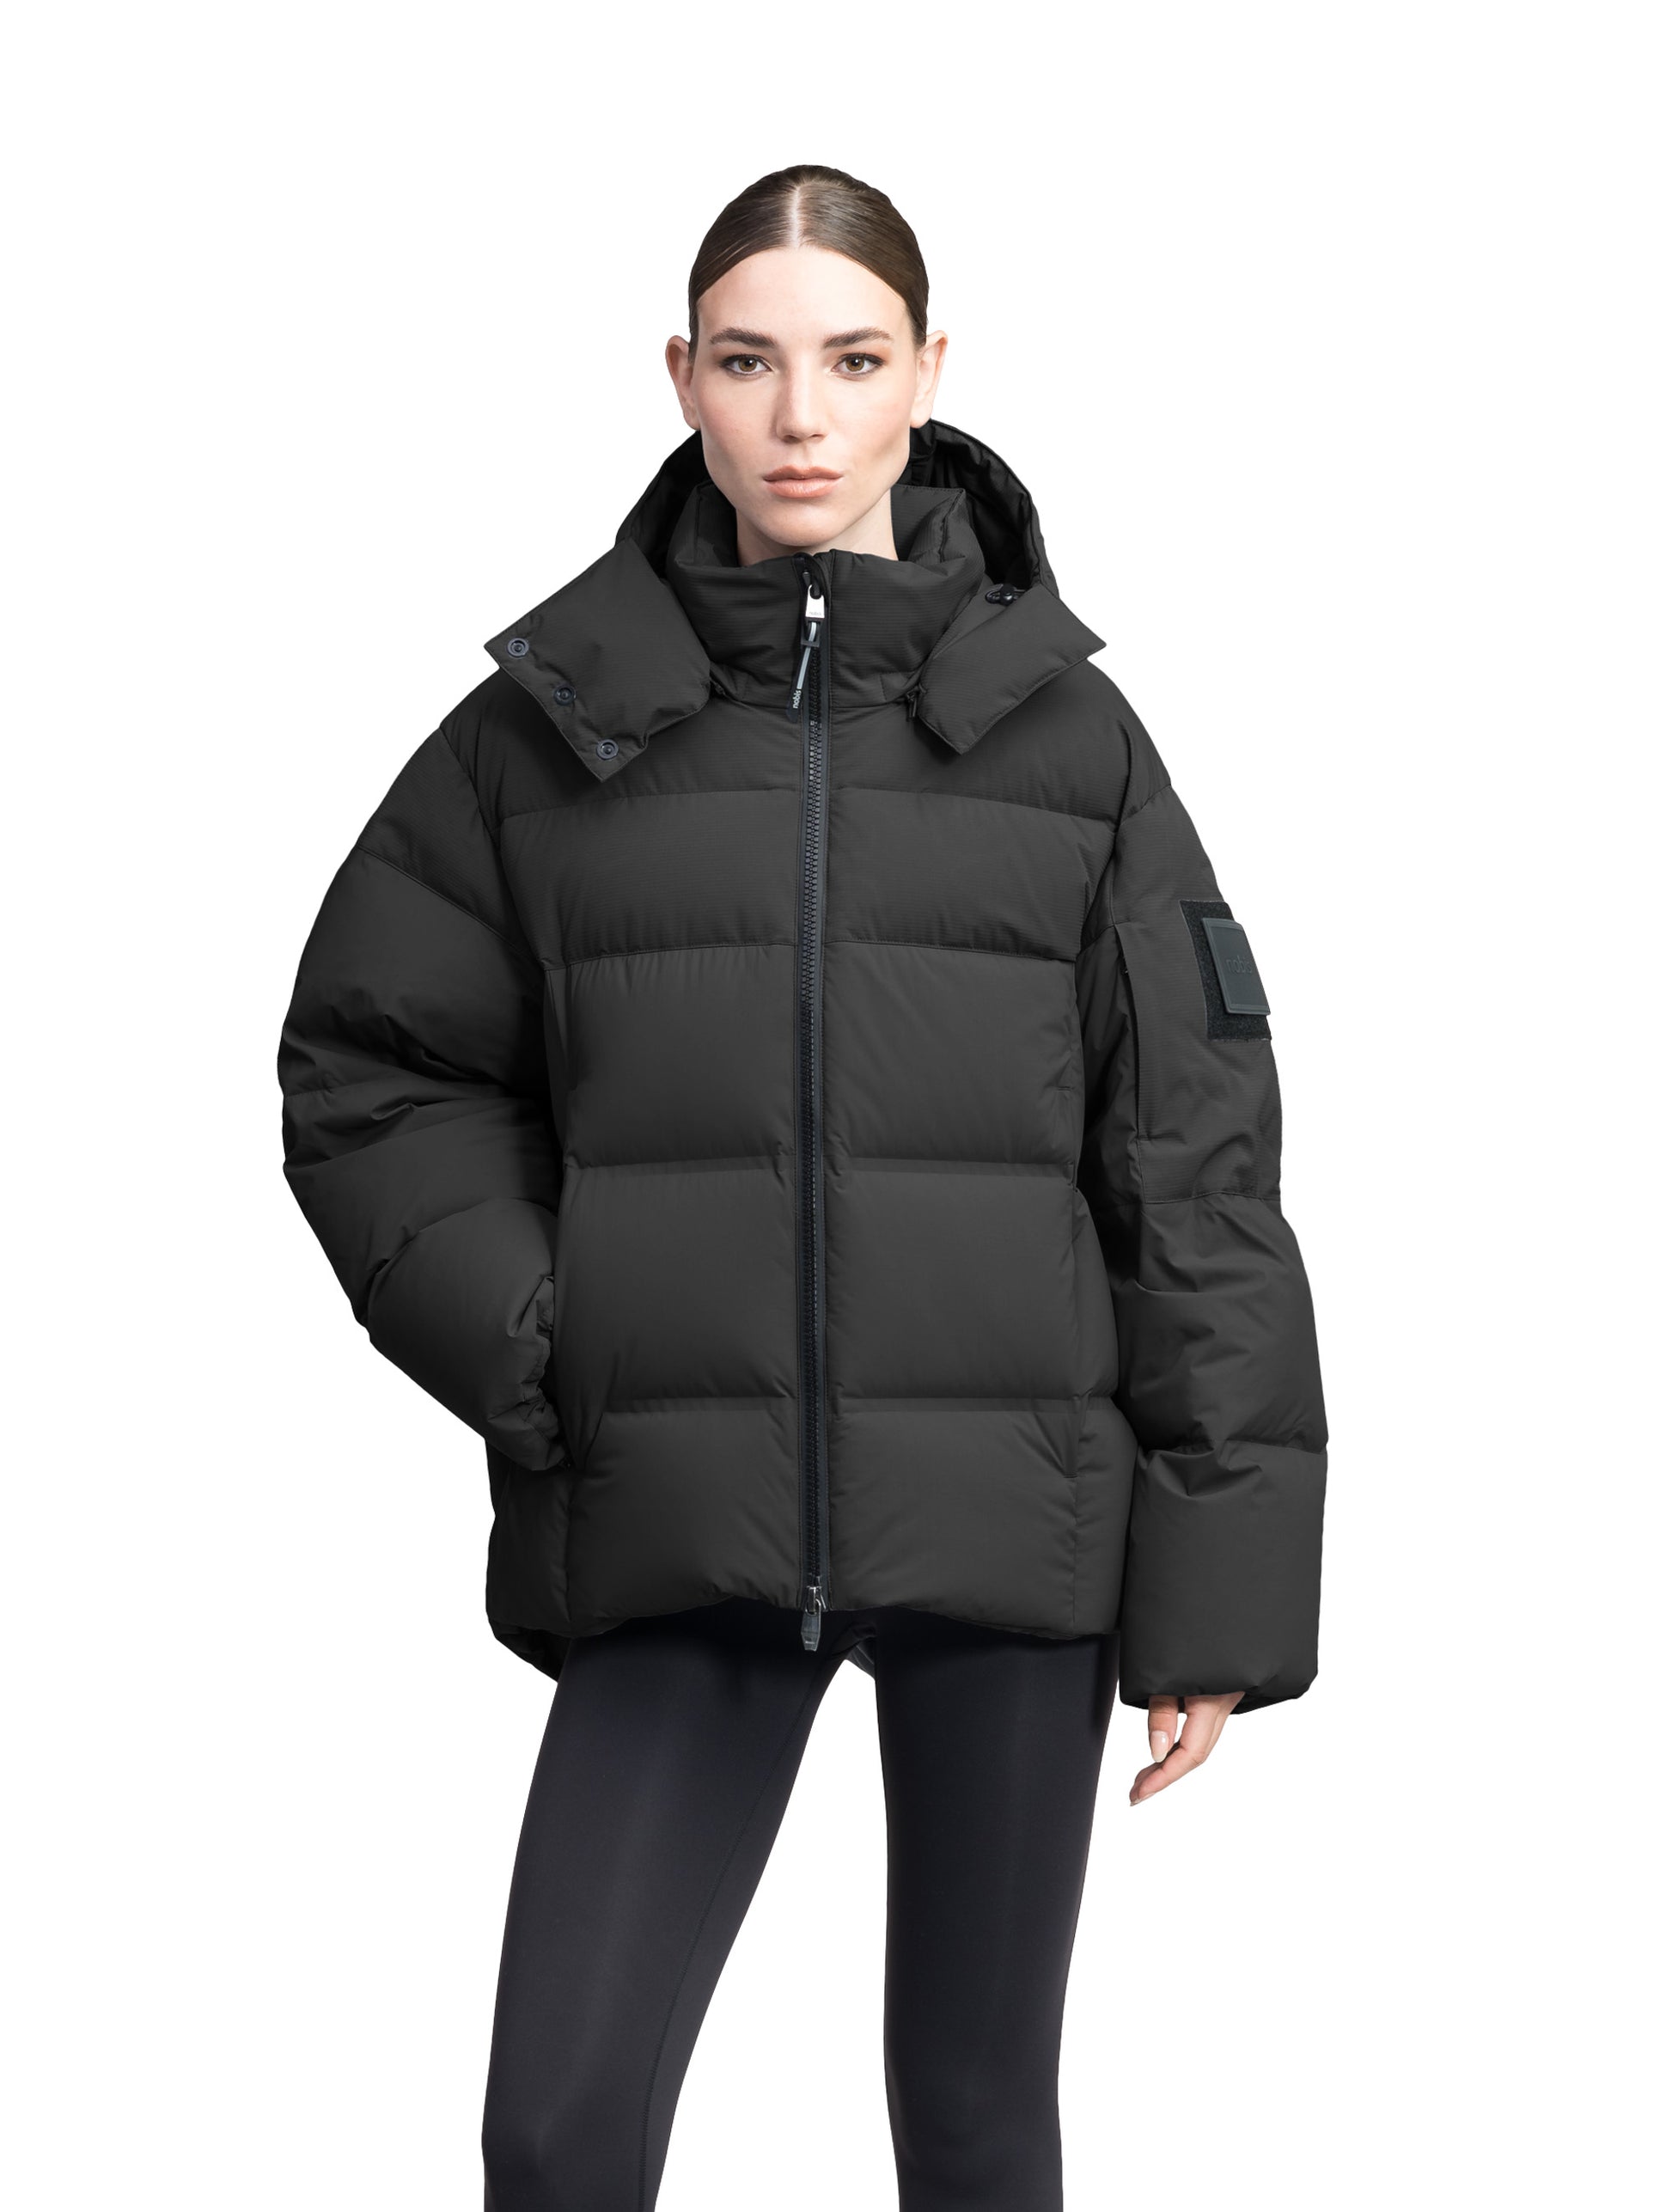 Women's Quilted Jacket - Safety Supplies Canada